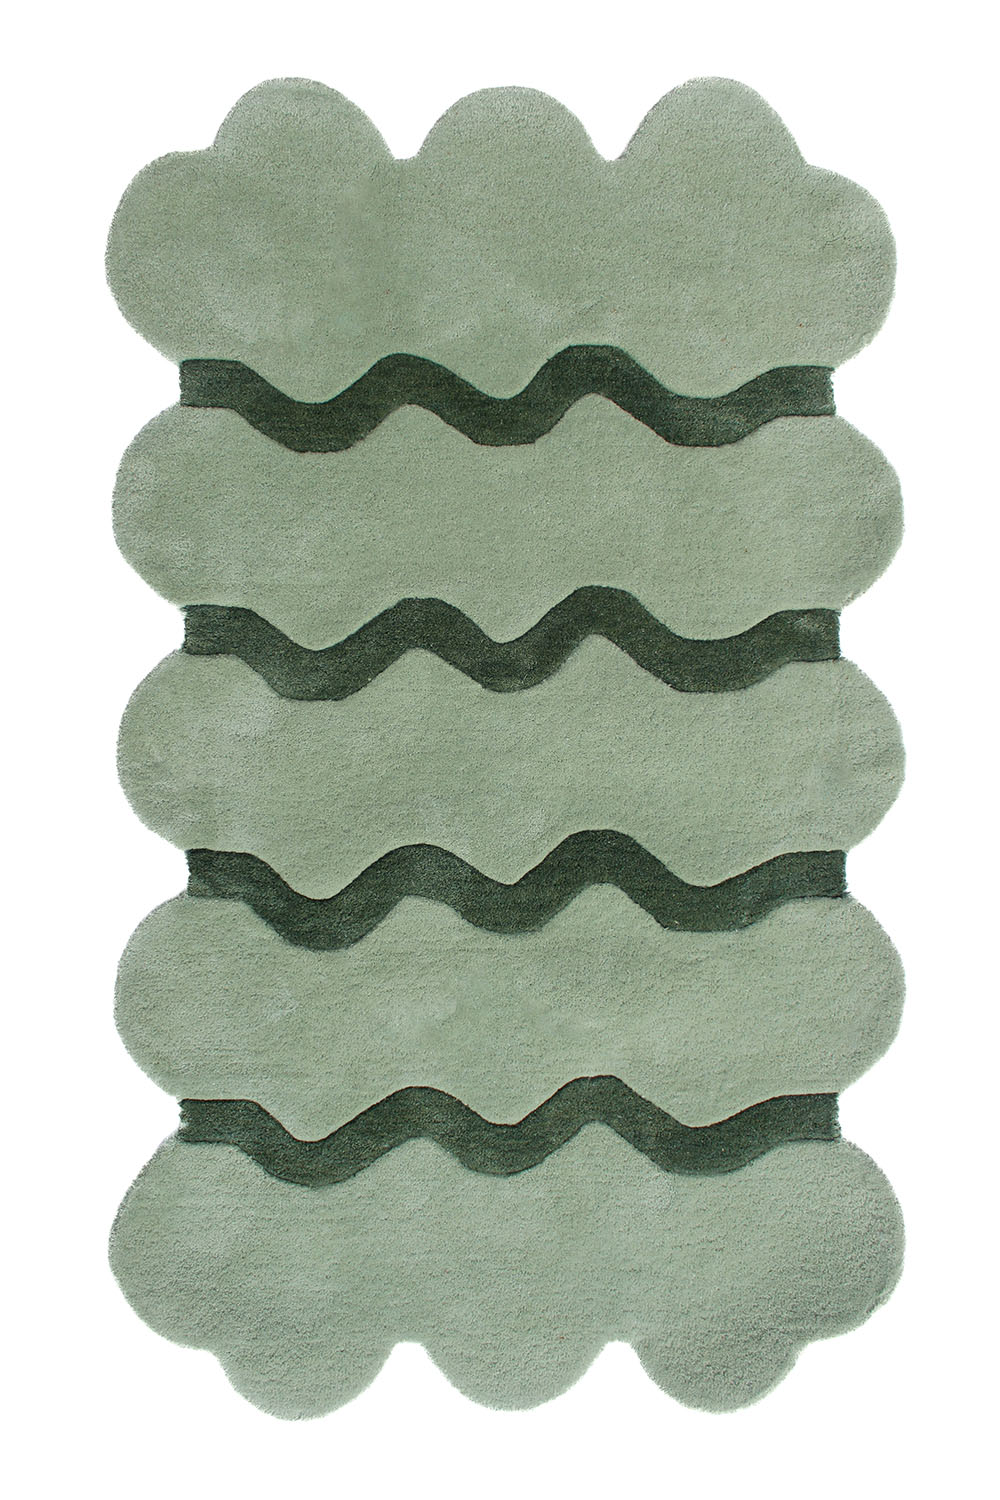 Sculpted Edge Hand Tufted Wool Rug in Green/Sage by Jubi